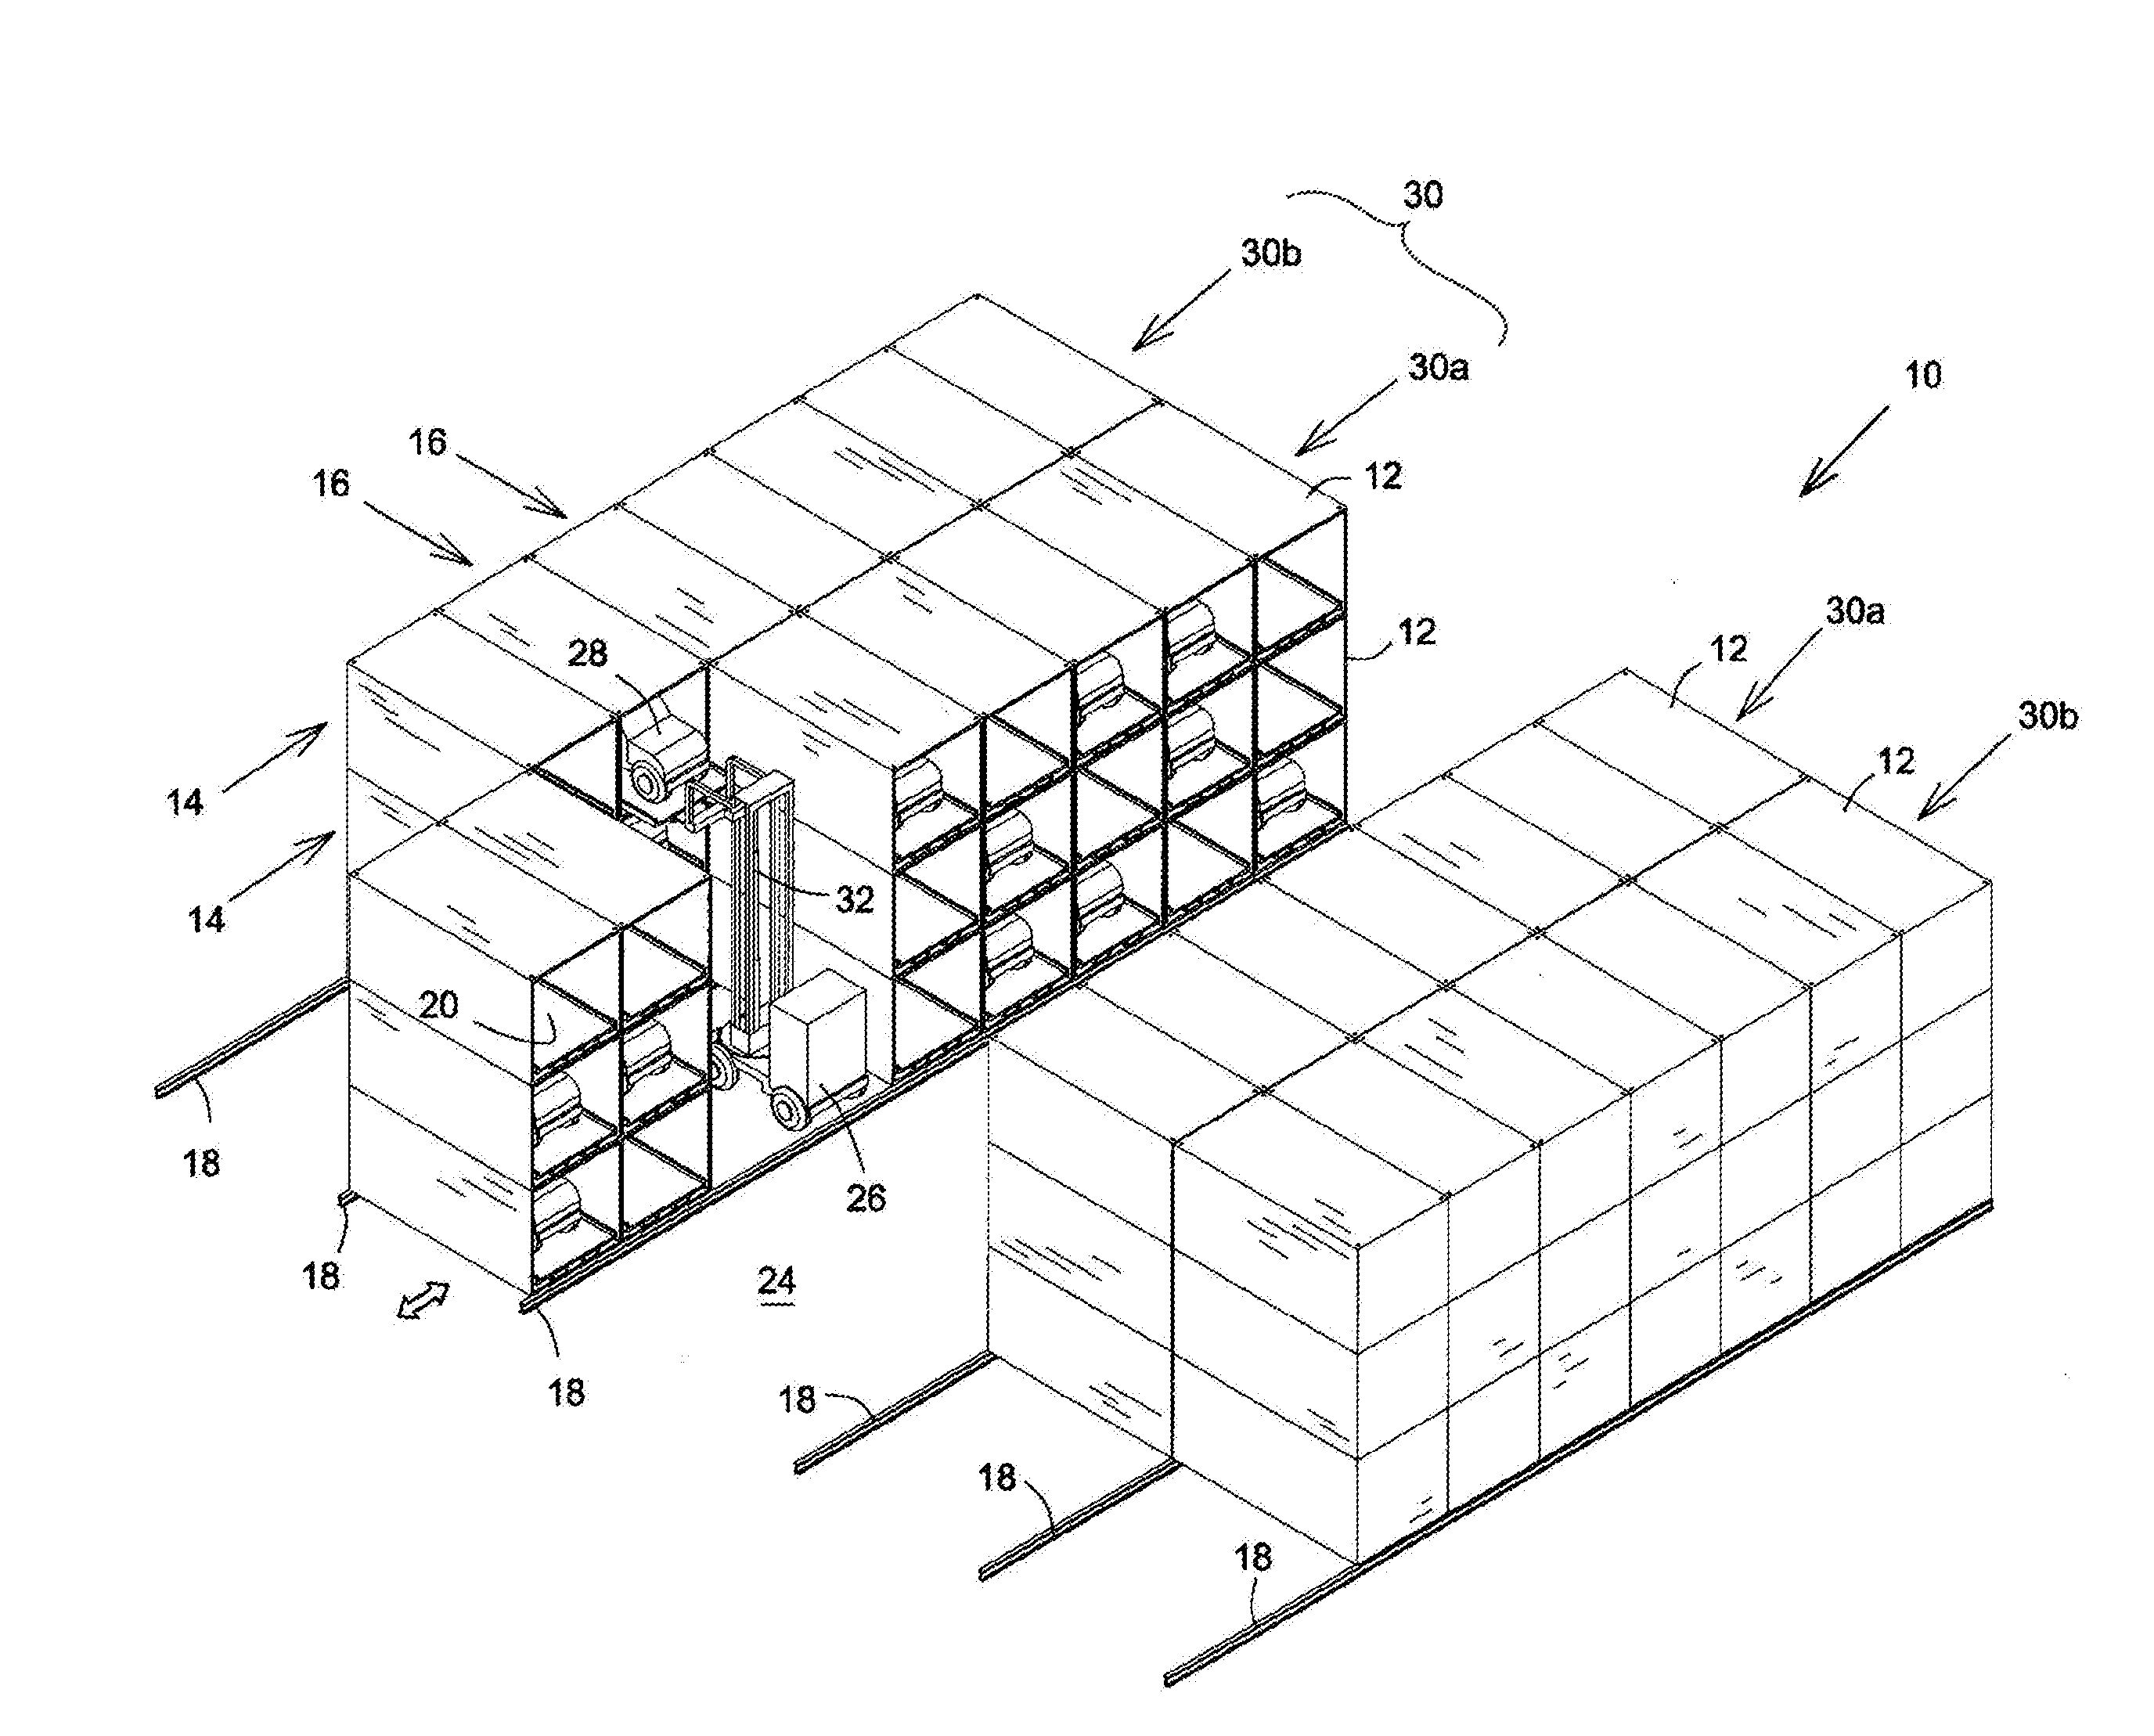 Multi-level parking lot and method